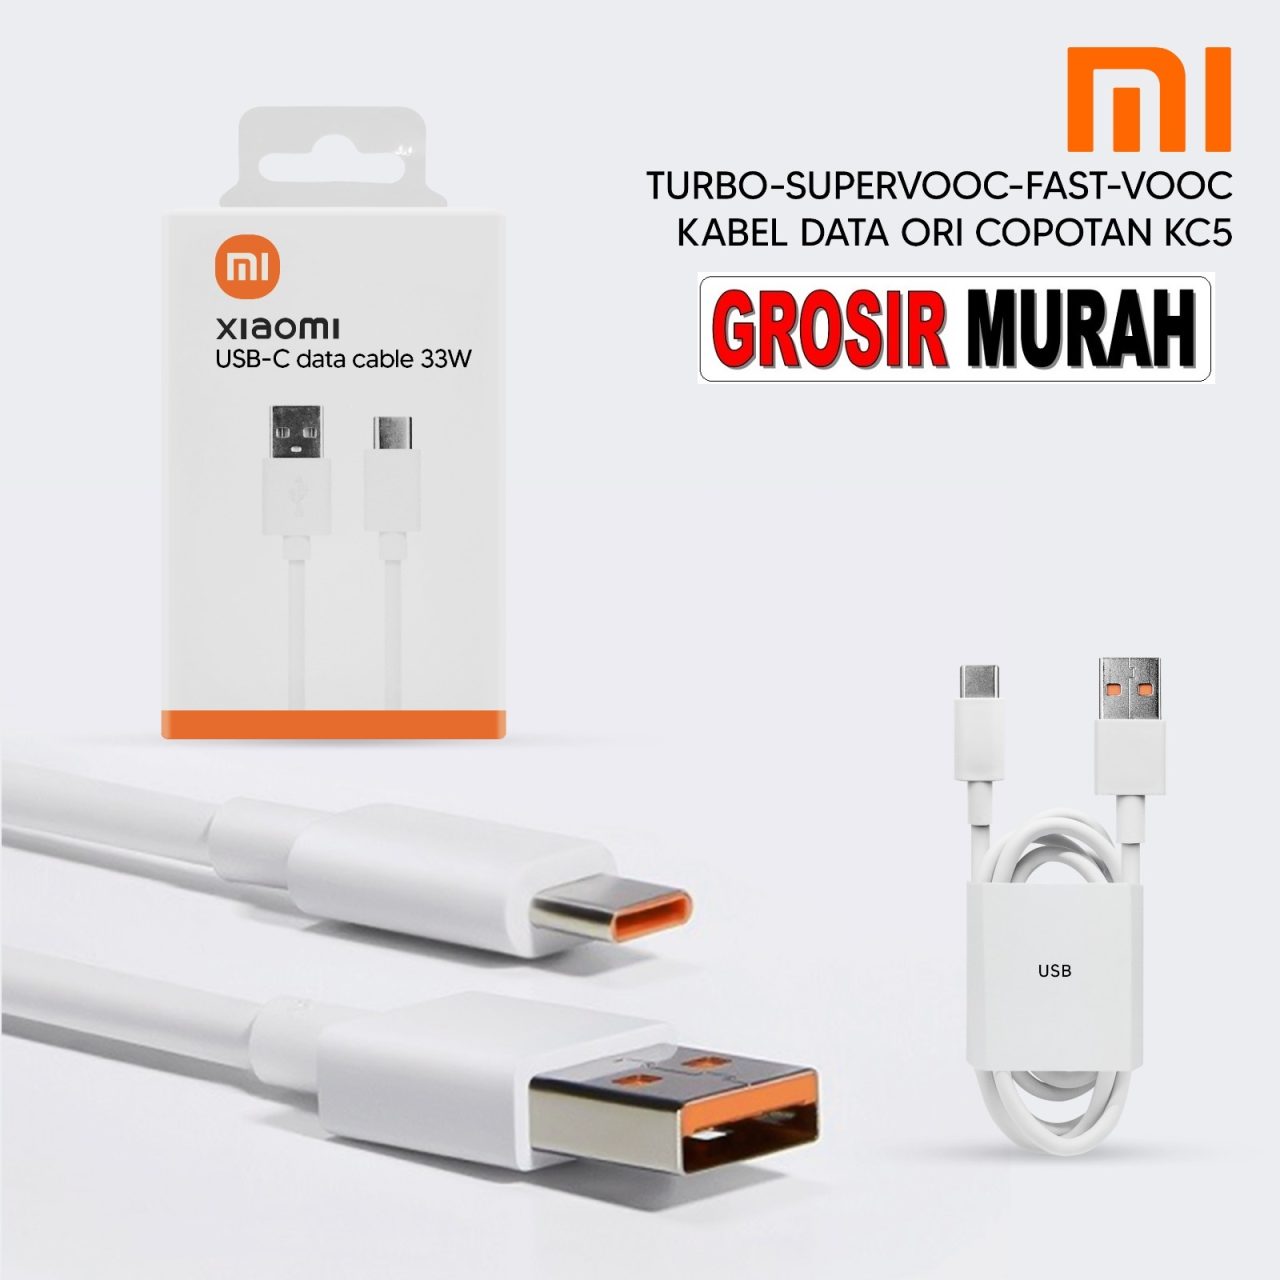 KABEL DATA XIAOMI TYPE C 33W KC5 Data Cable Charge Fast Charging Usb Type C Super Vooc Spare Part Grosir Sparepart hp